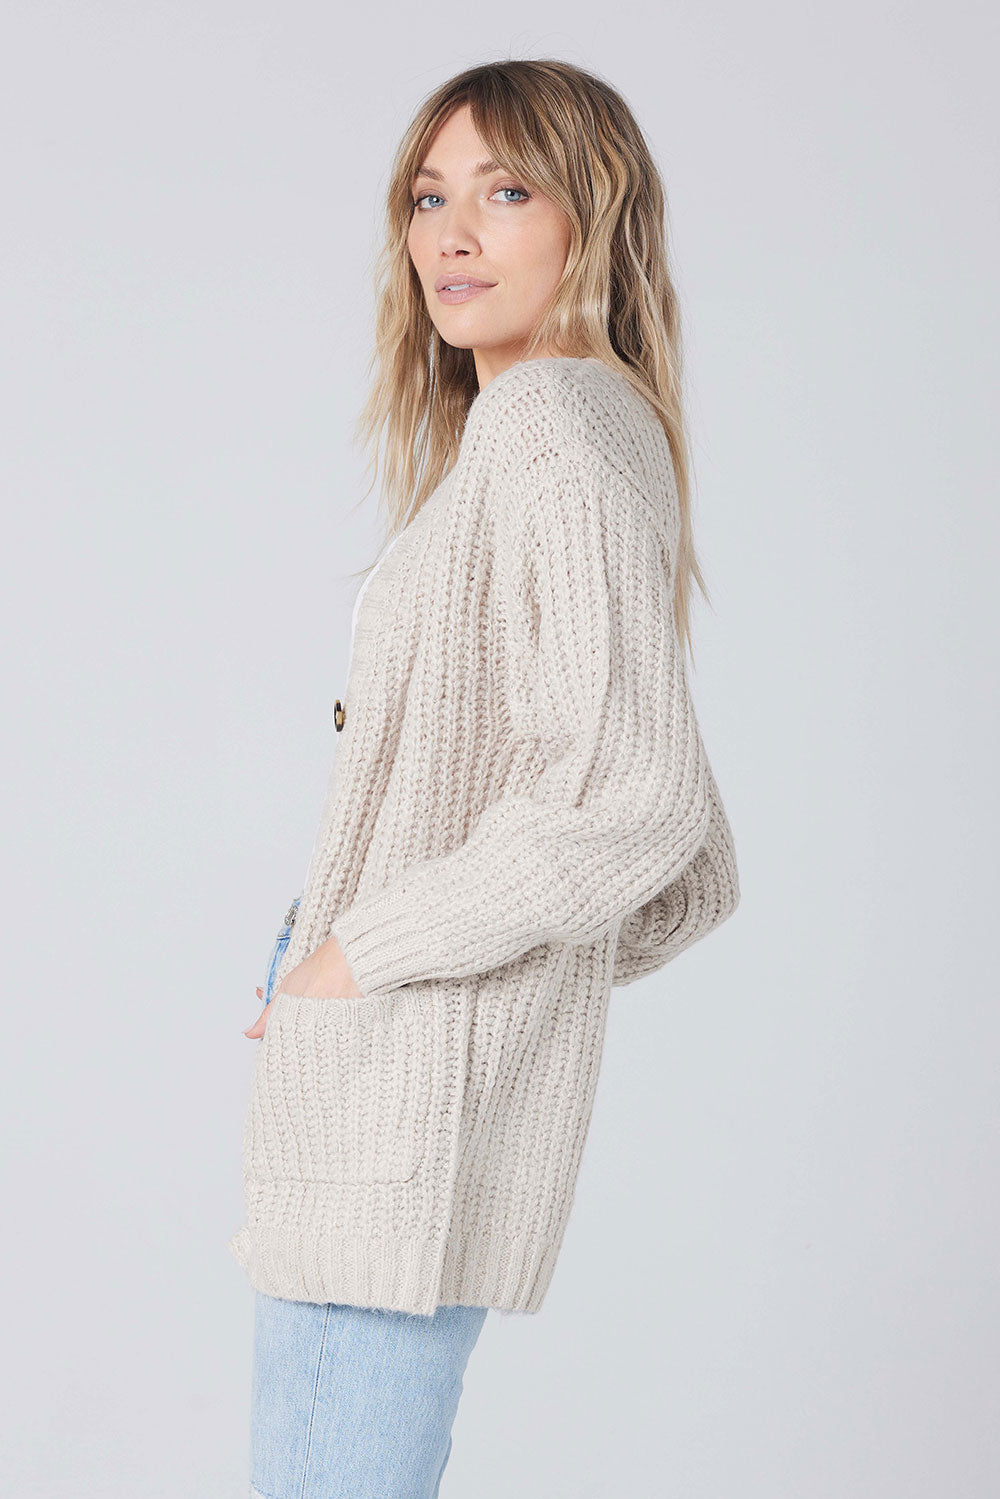 Calla Sweater - Saltwater Luxe